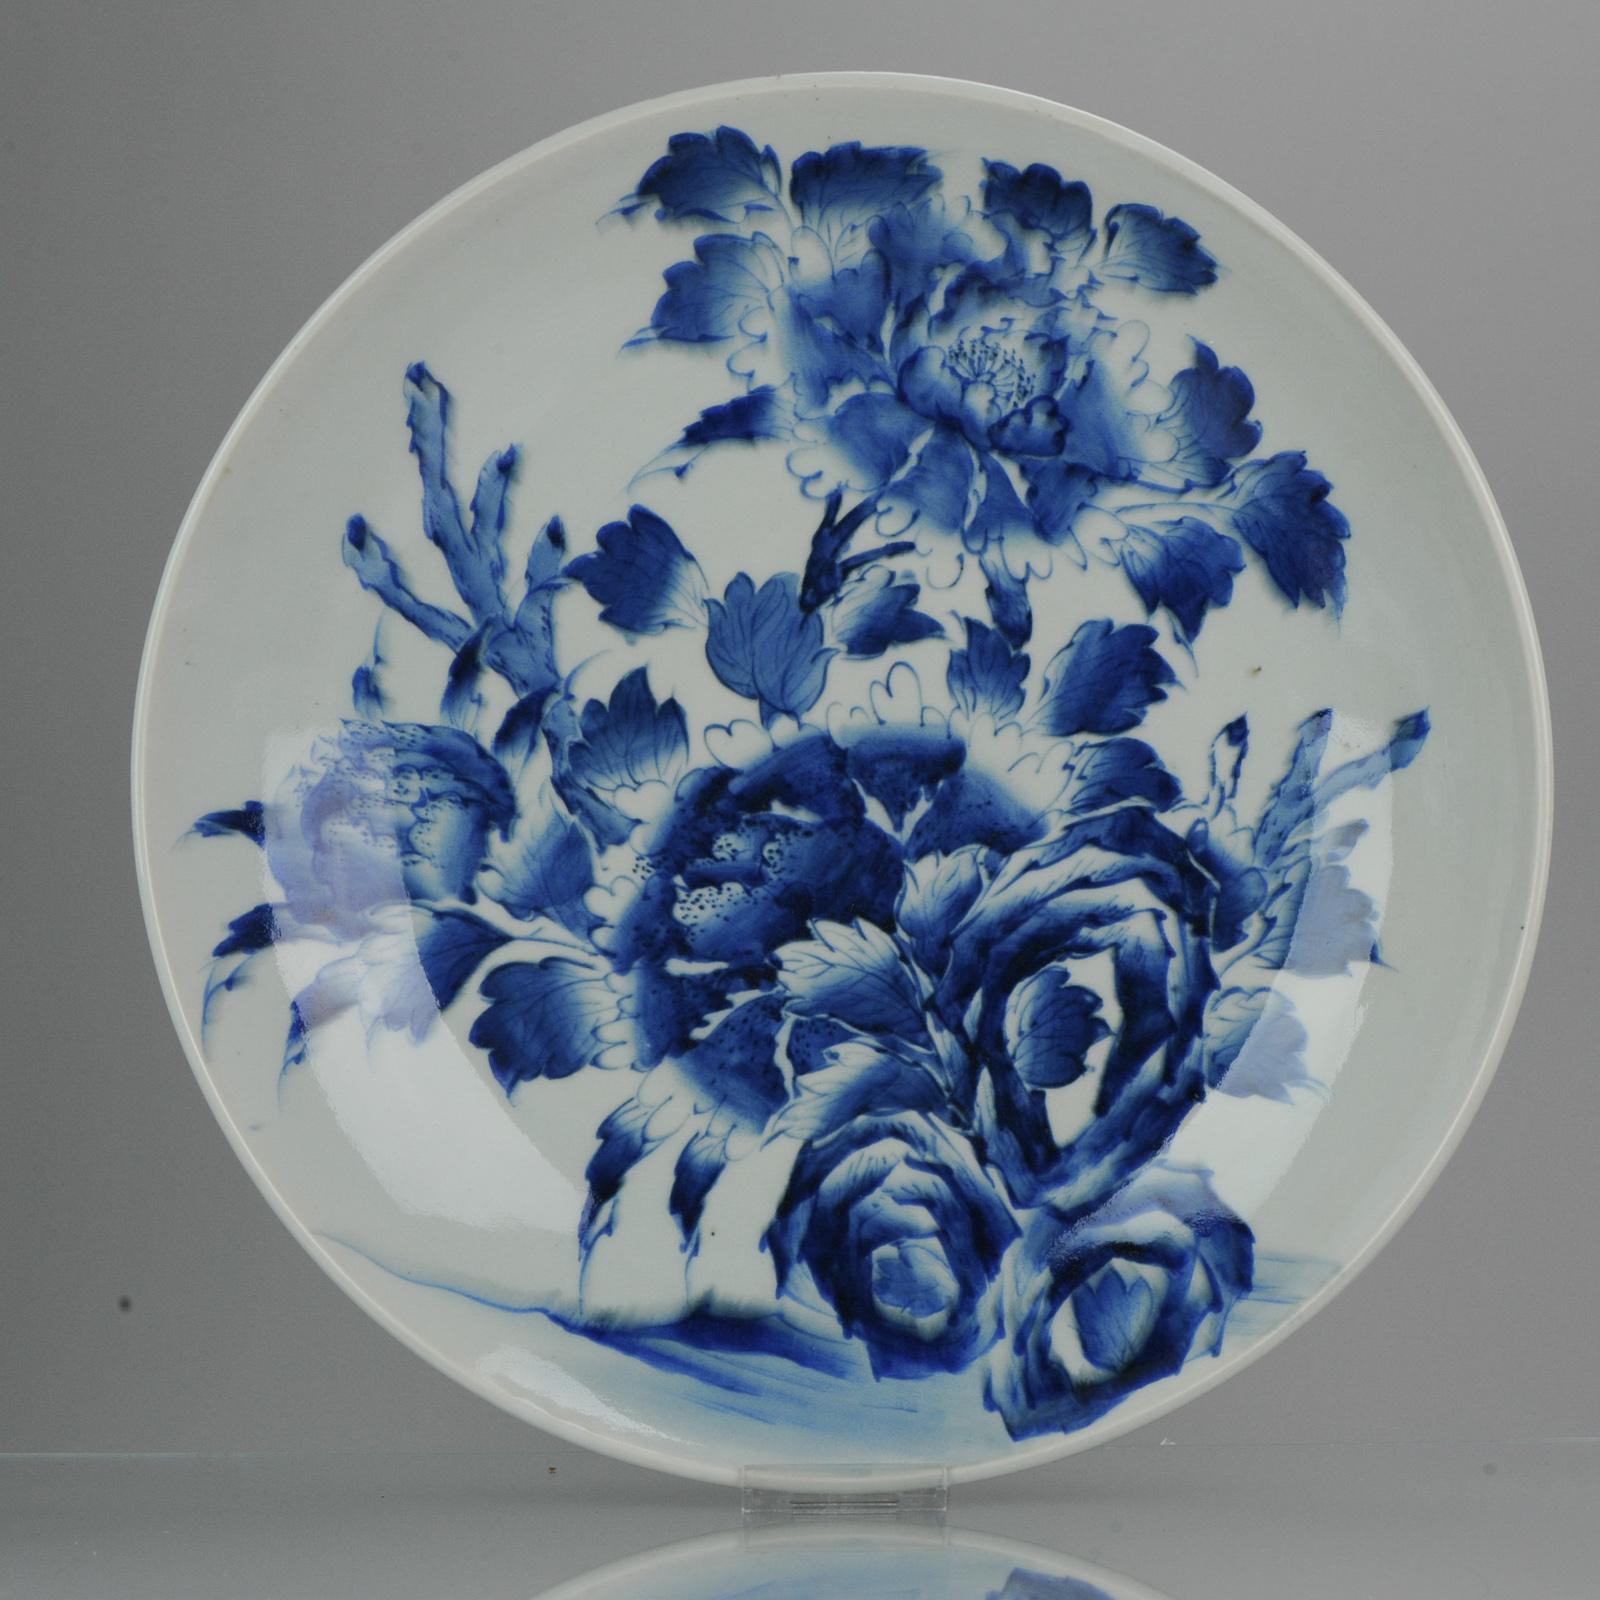 A Large and very nicely decorated Japanese Porcelain charger. Deep cobalt colors with a cool kind of blurry scene flowers, which must be Peony flowers.

The base has a nice Qianlong mark and spots where the spurs were attached for baking in the